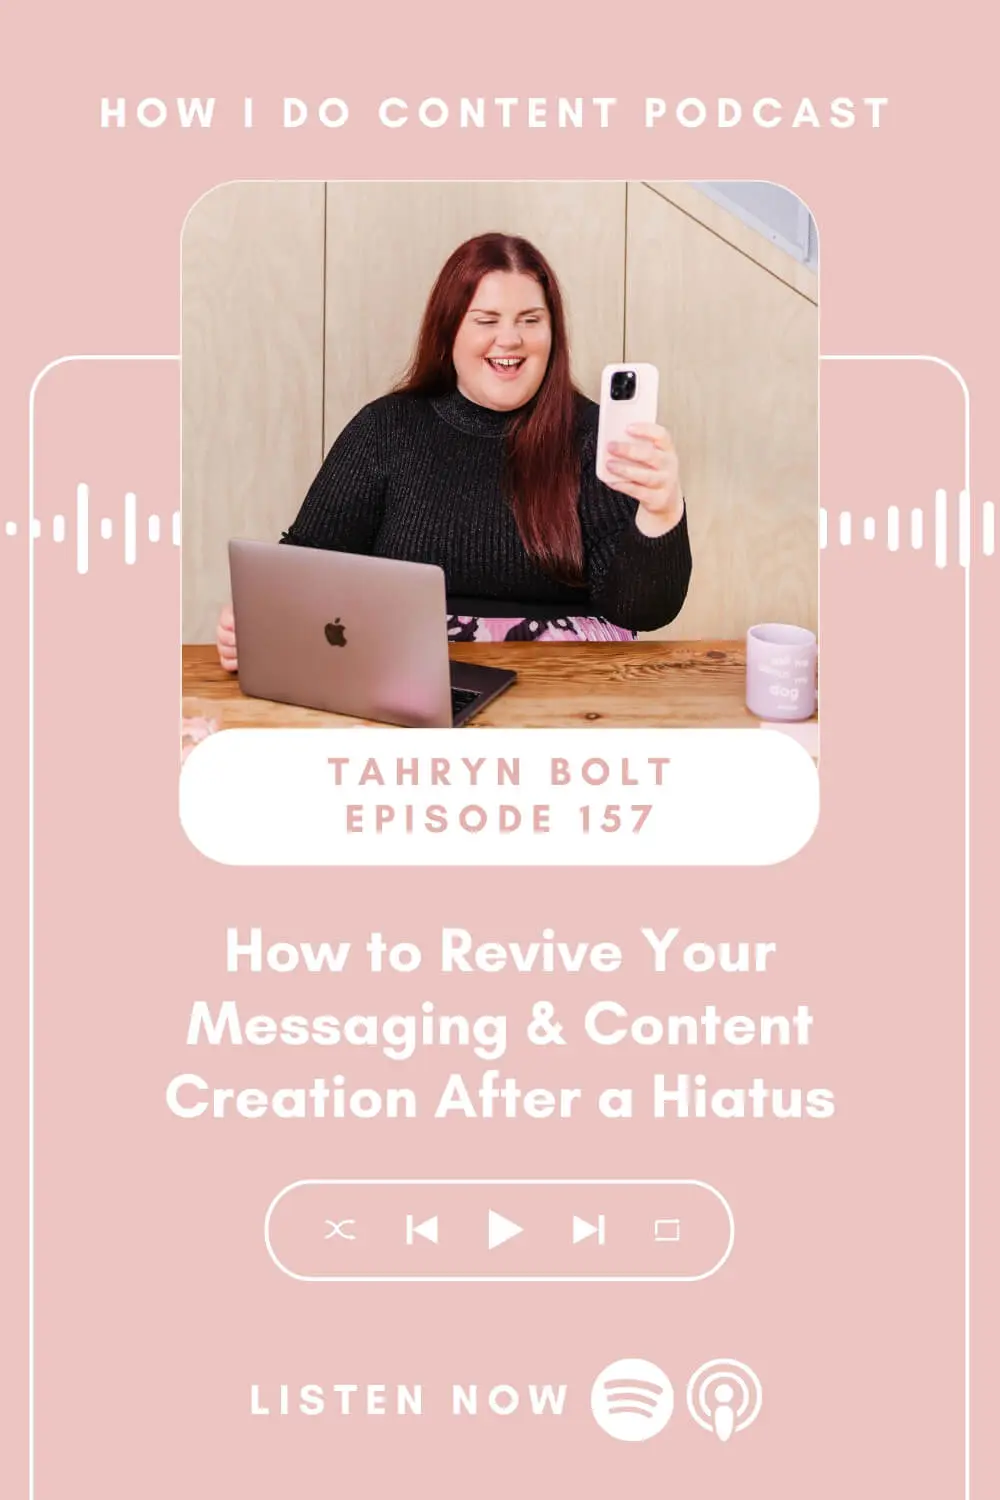 How to Revive Your Messaging & Content Creation After a Hiatus